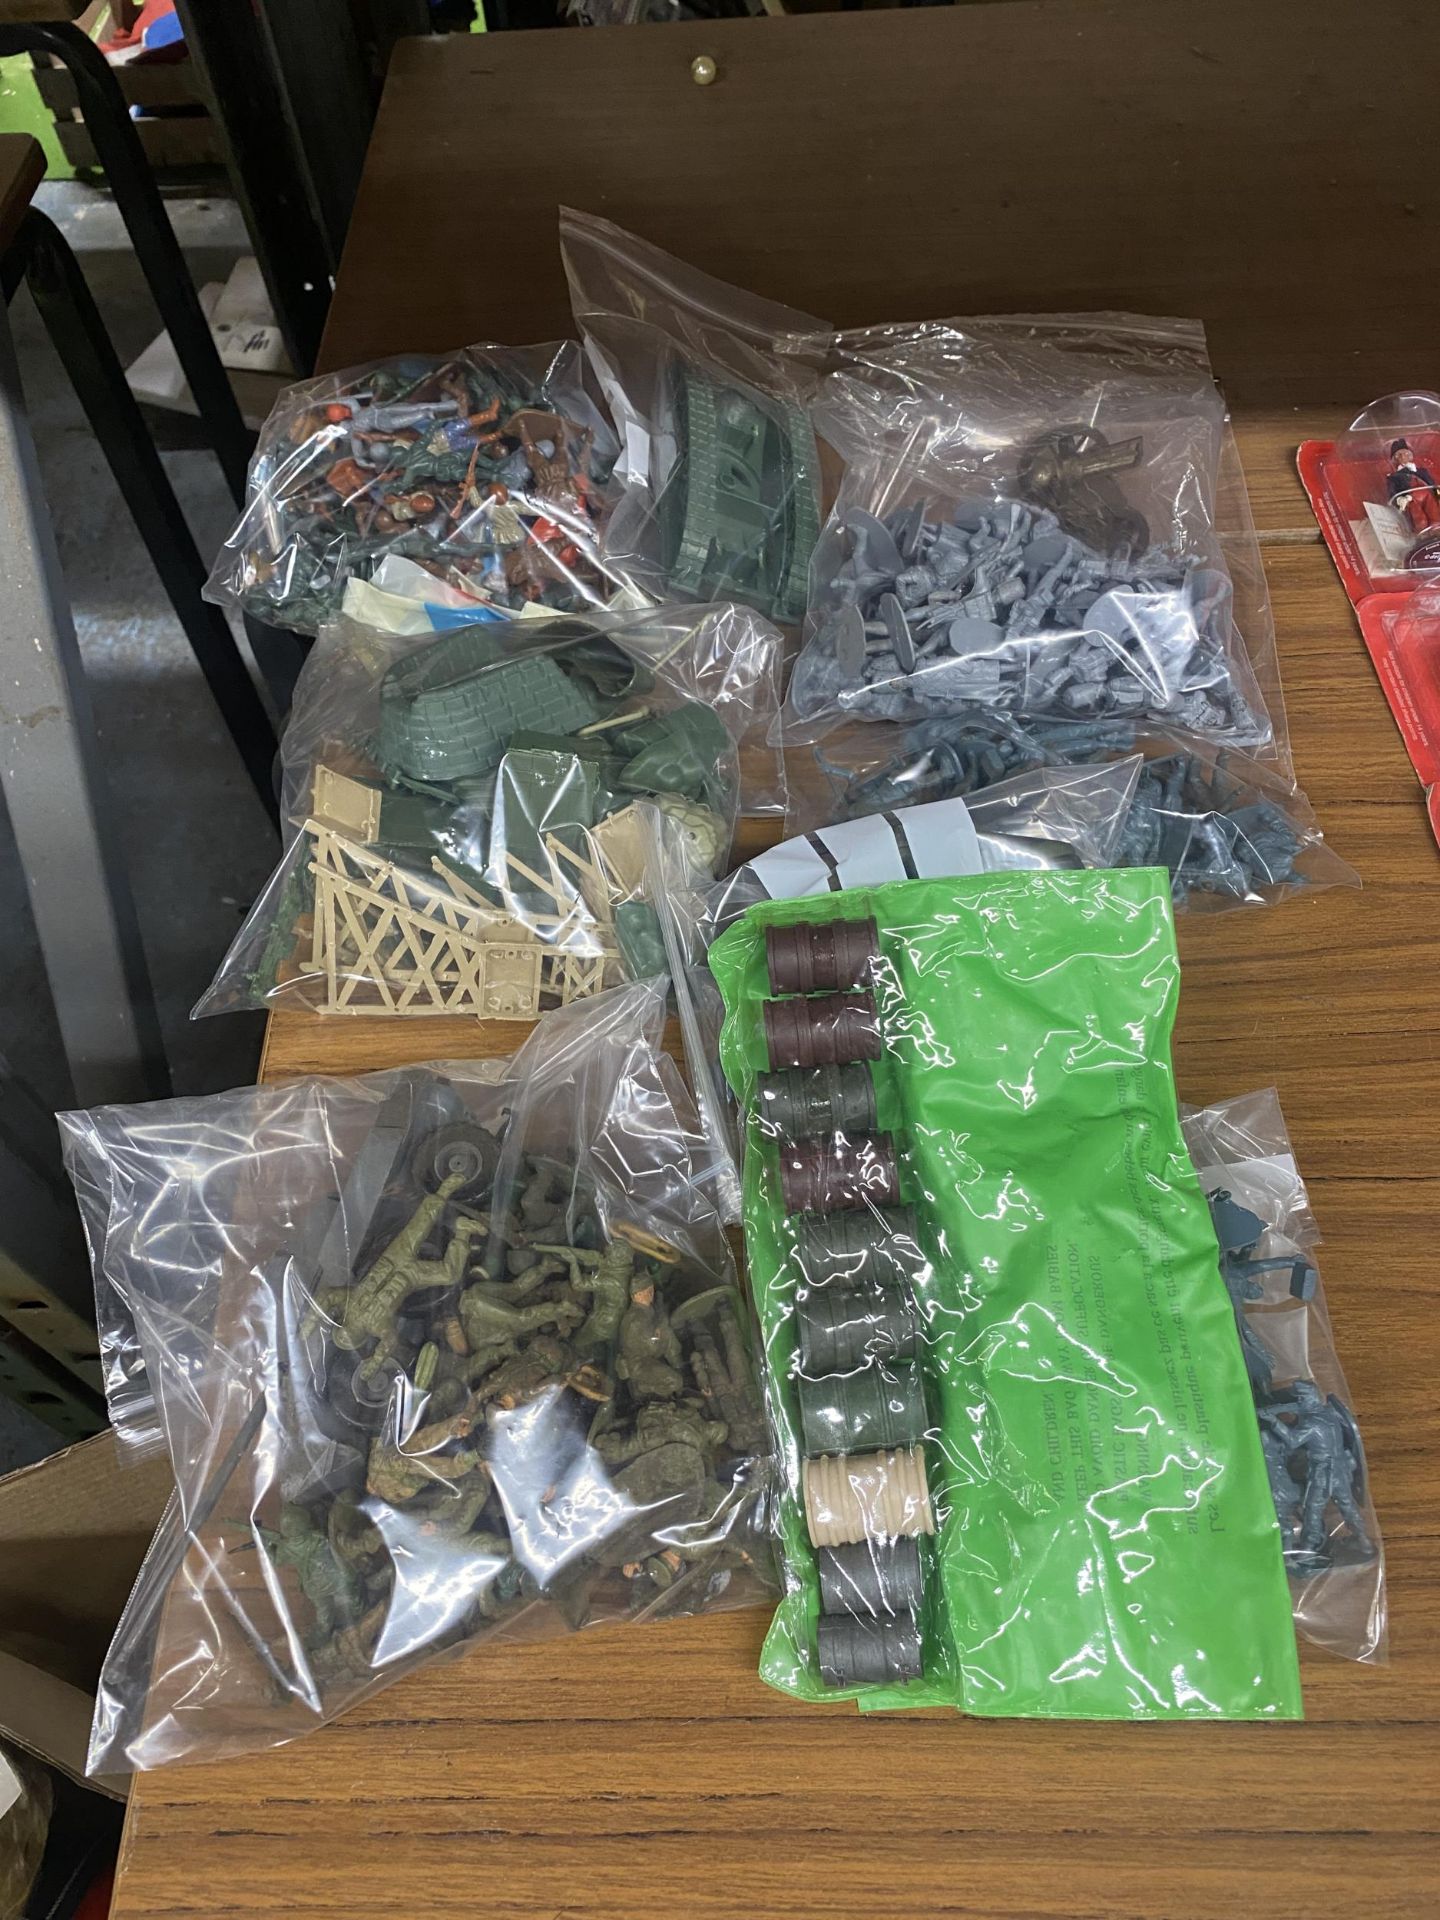 A GROUP OF ARMY FIGURES IN PLASTIC BAGS